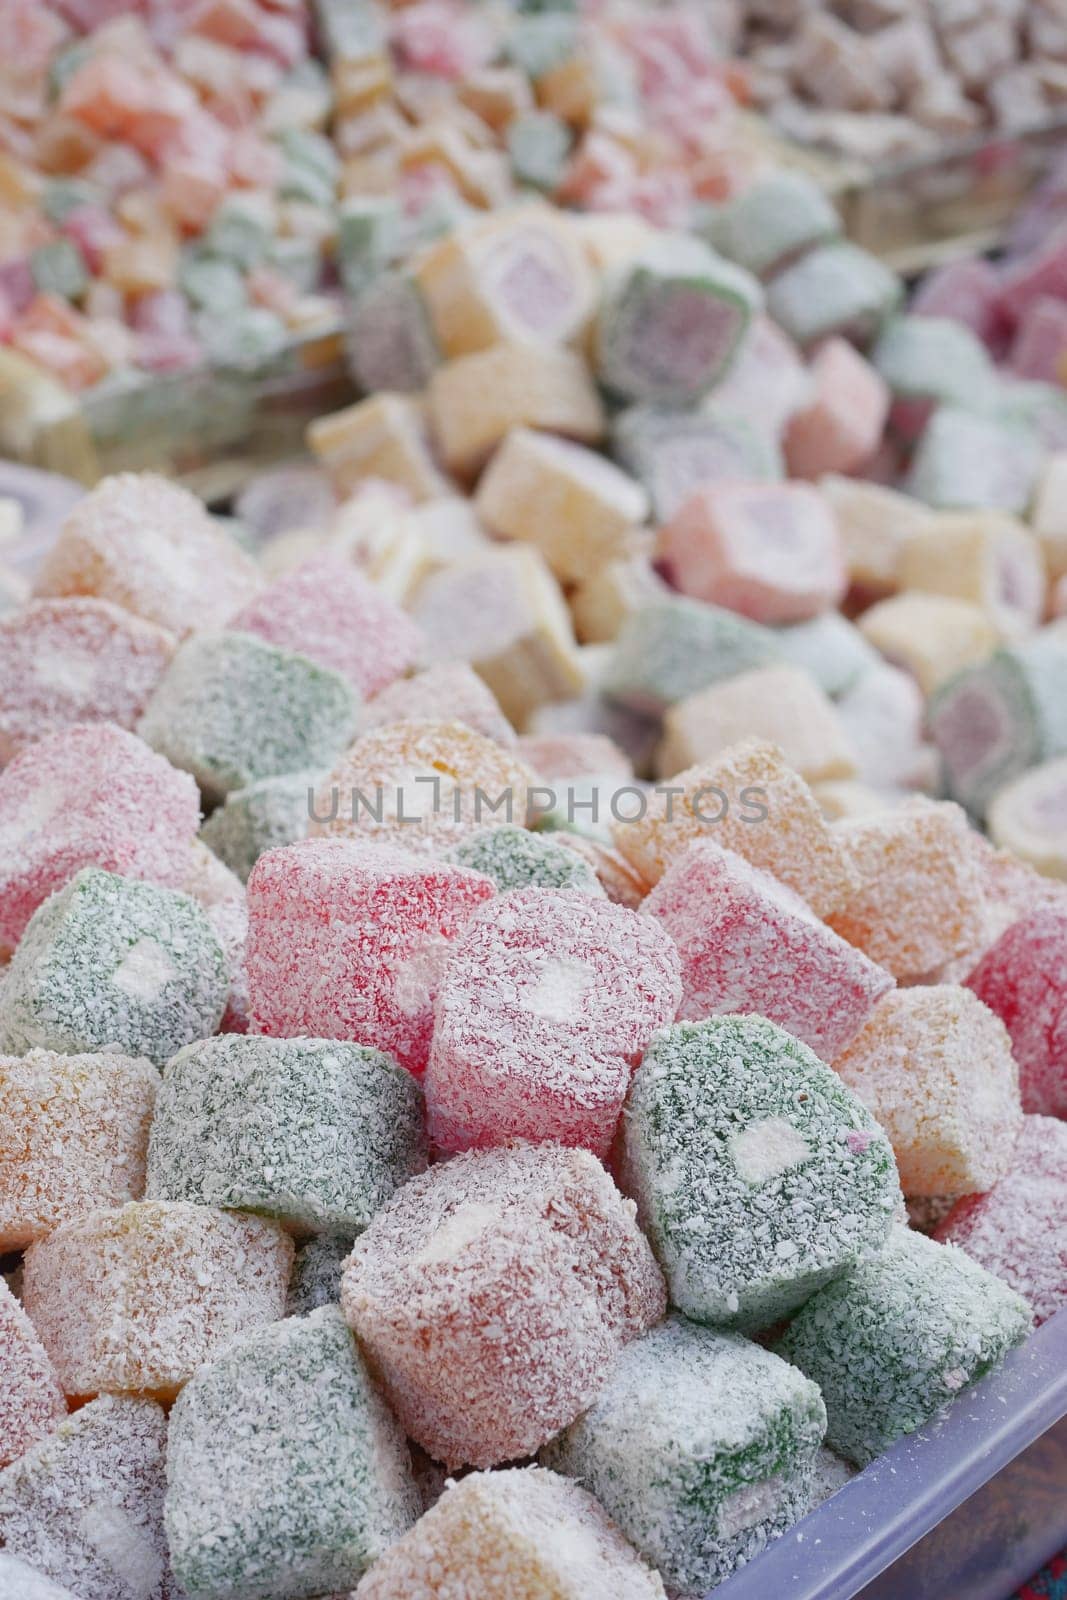 turkish delight or lokum of red, green, orange and yellow colors